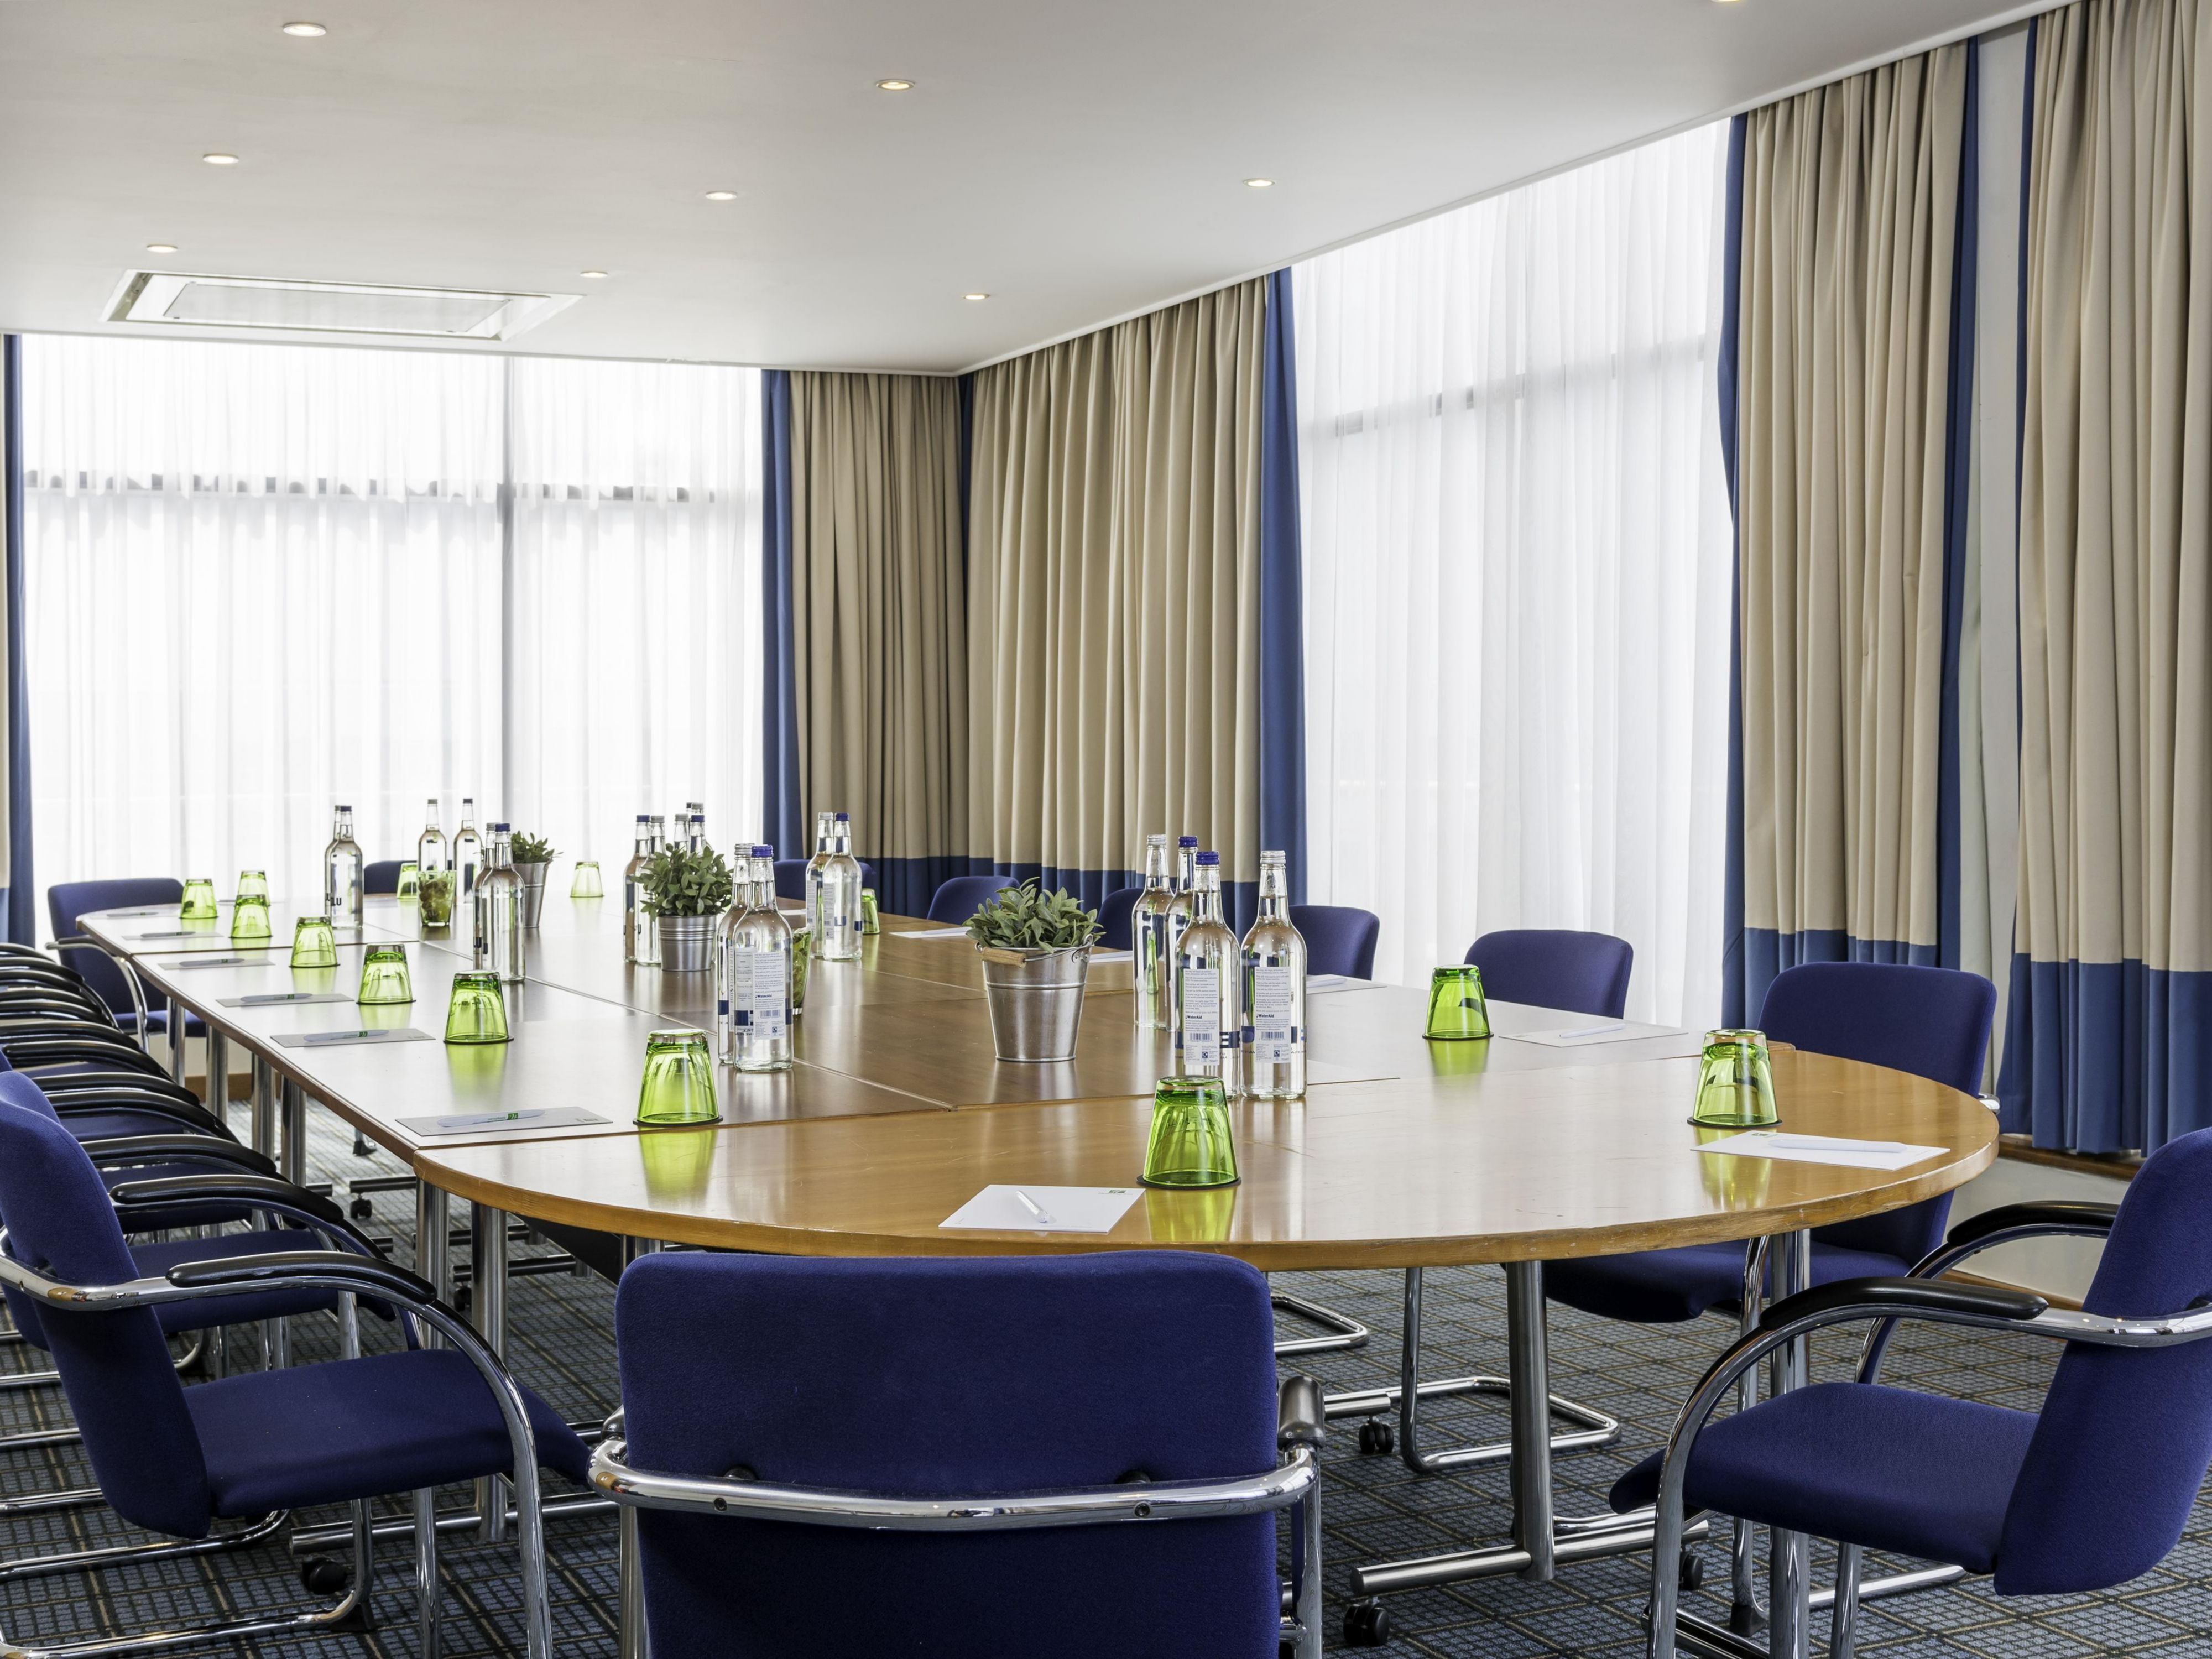 Host meetings or events for up to 100 guests in our fully equipped, versatile meeting and event rooms in the dedicated Academy Conference Centre. Our dedicated team is on hand to support with both planning and delivery of your event.